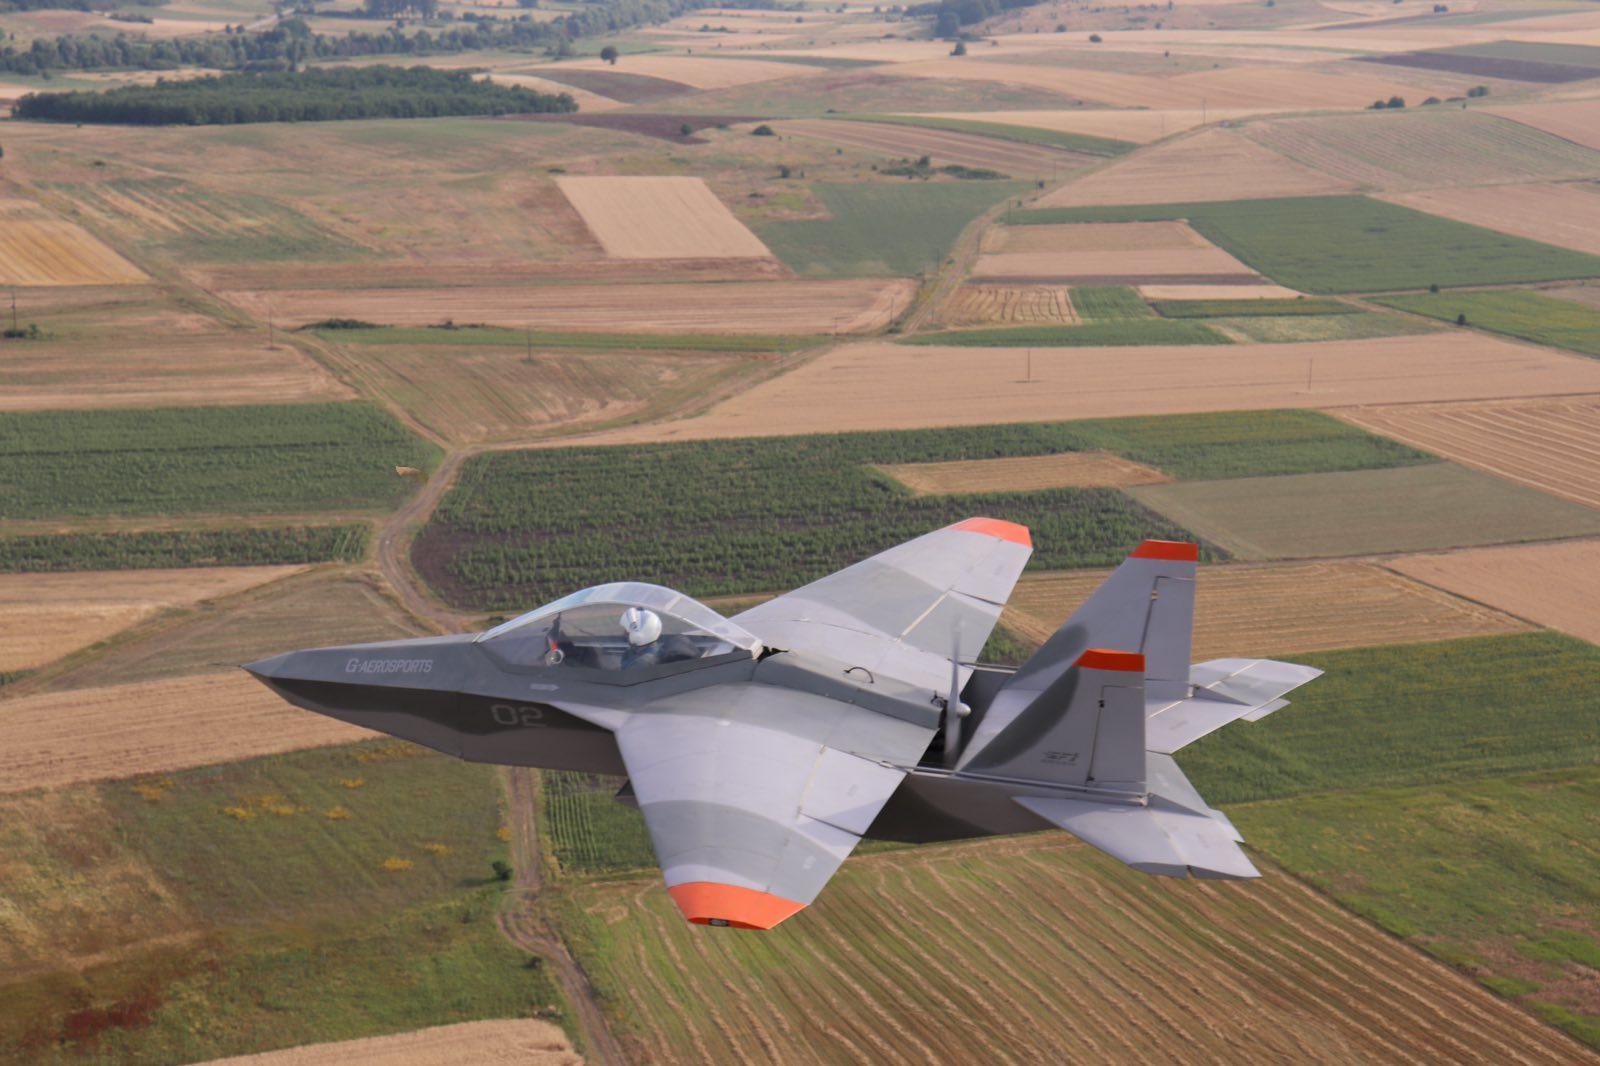 Photo looking down of an SF-1 Archon flying over cultivated fields.